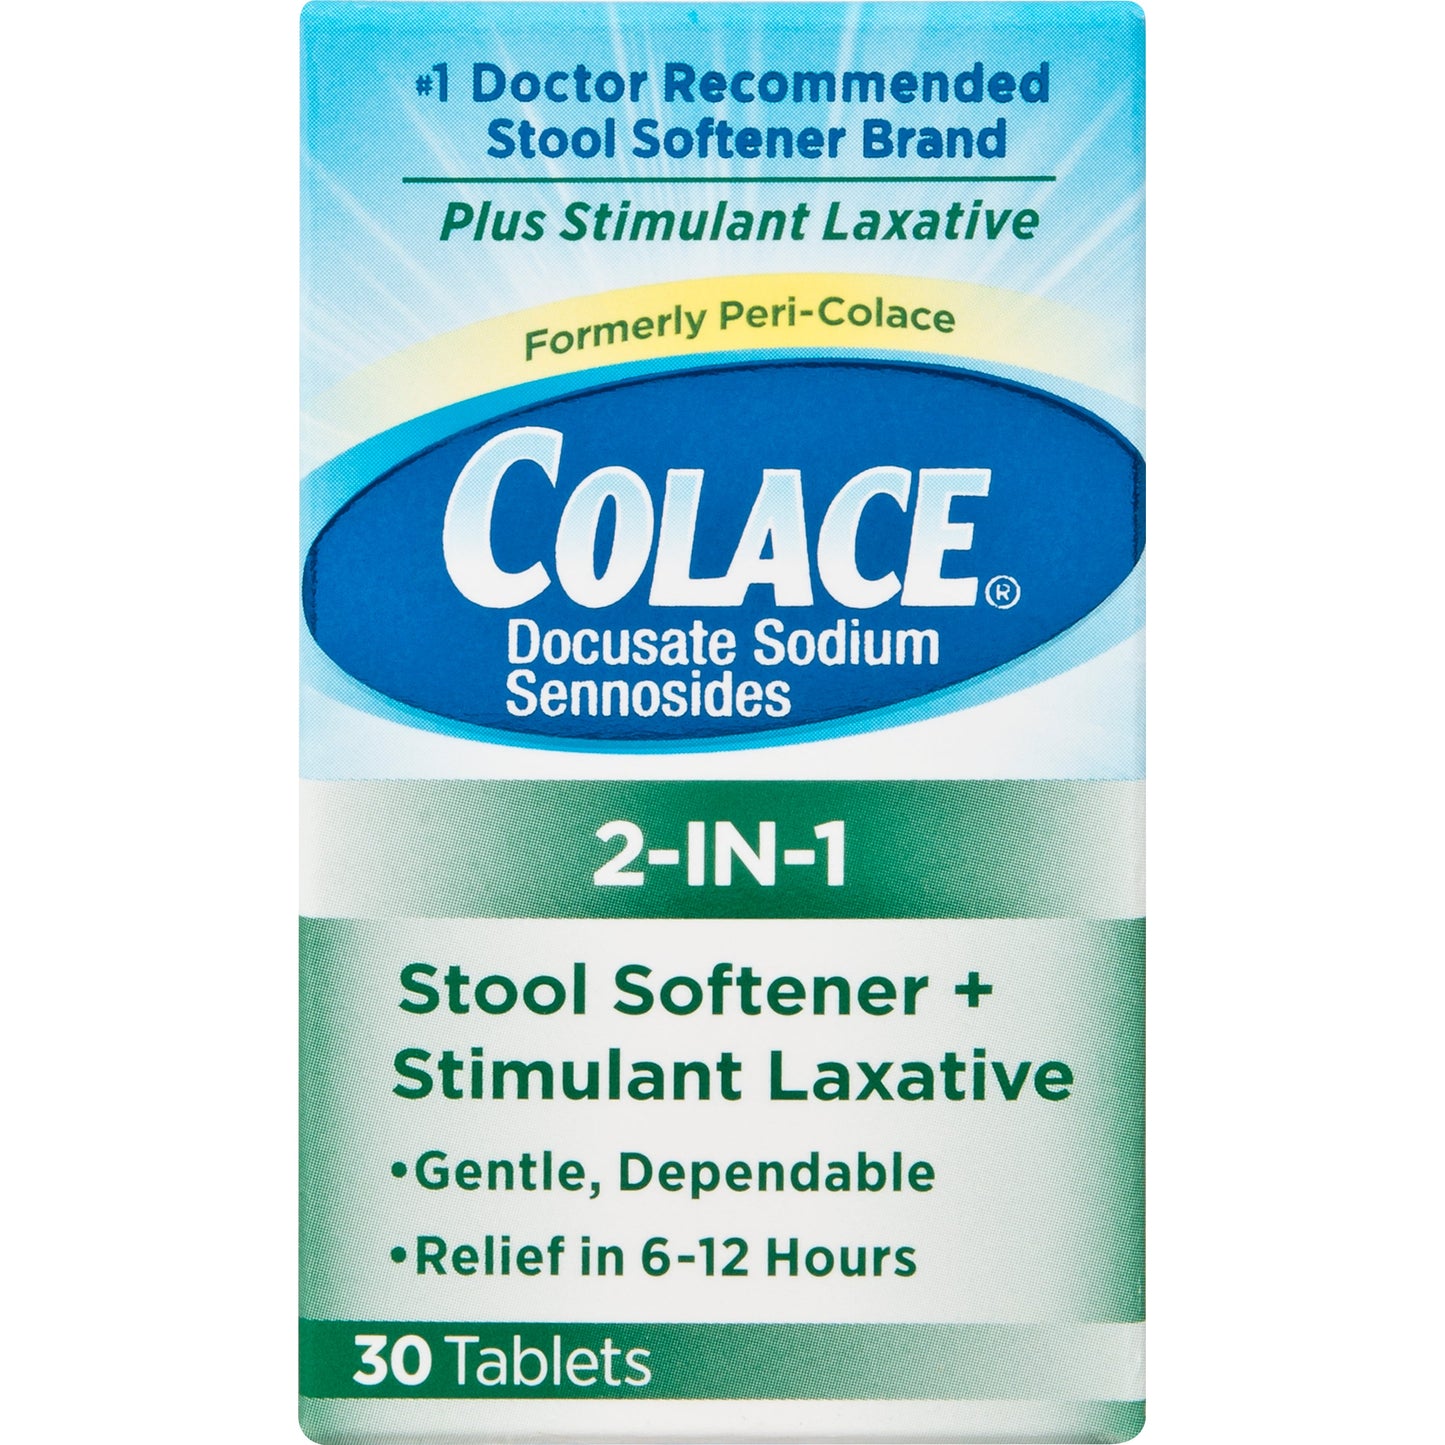 Colace 2 in 1 Stool Softener & Stimulant Laxative 30 Count